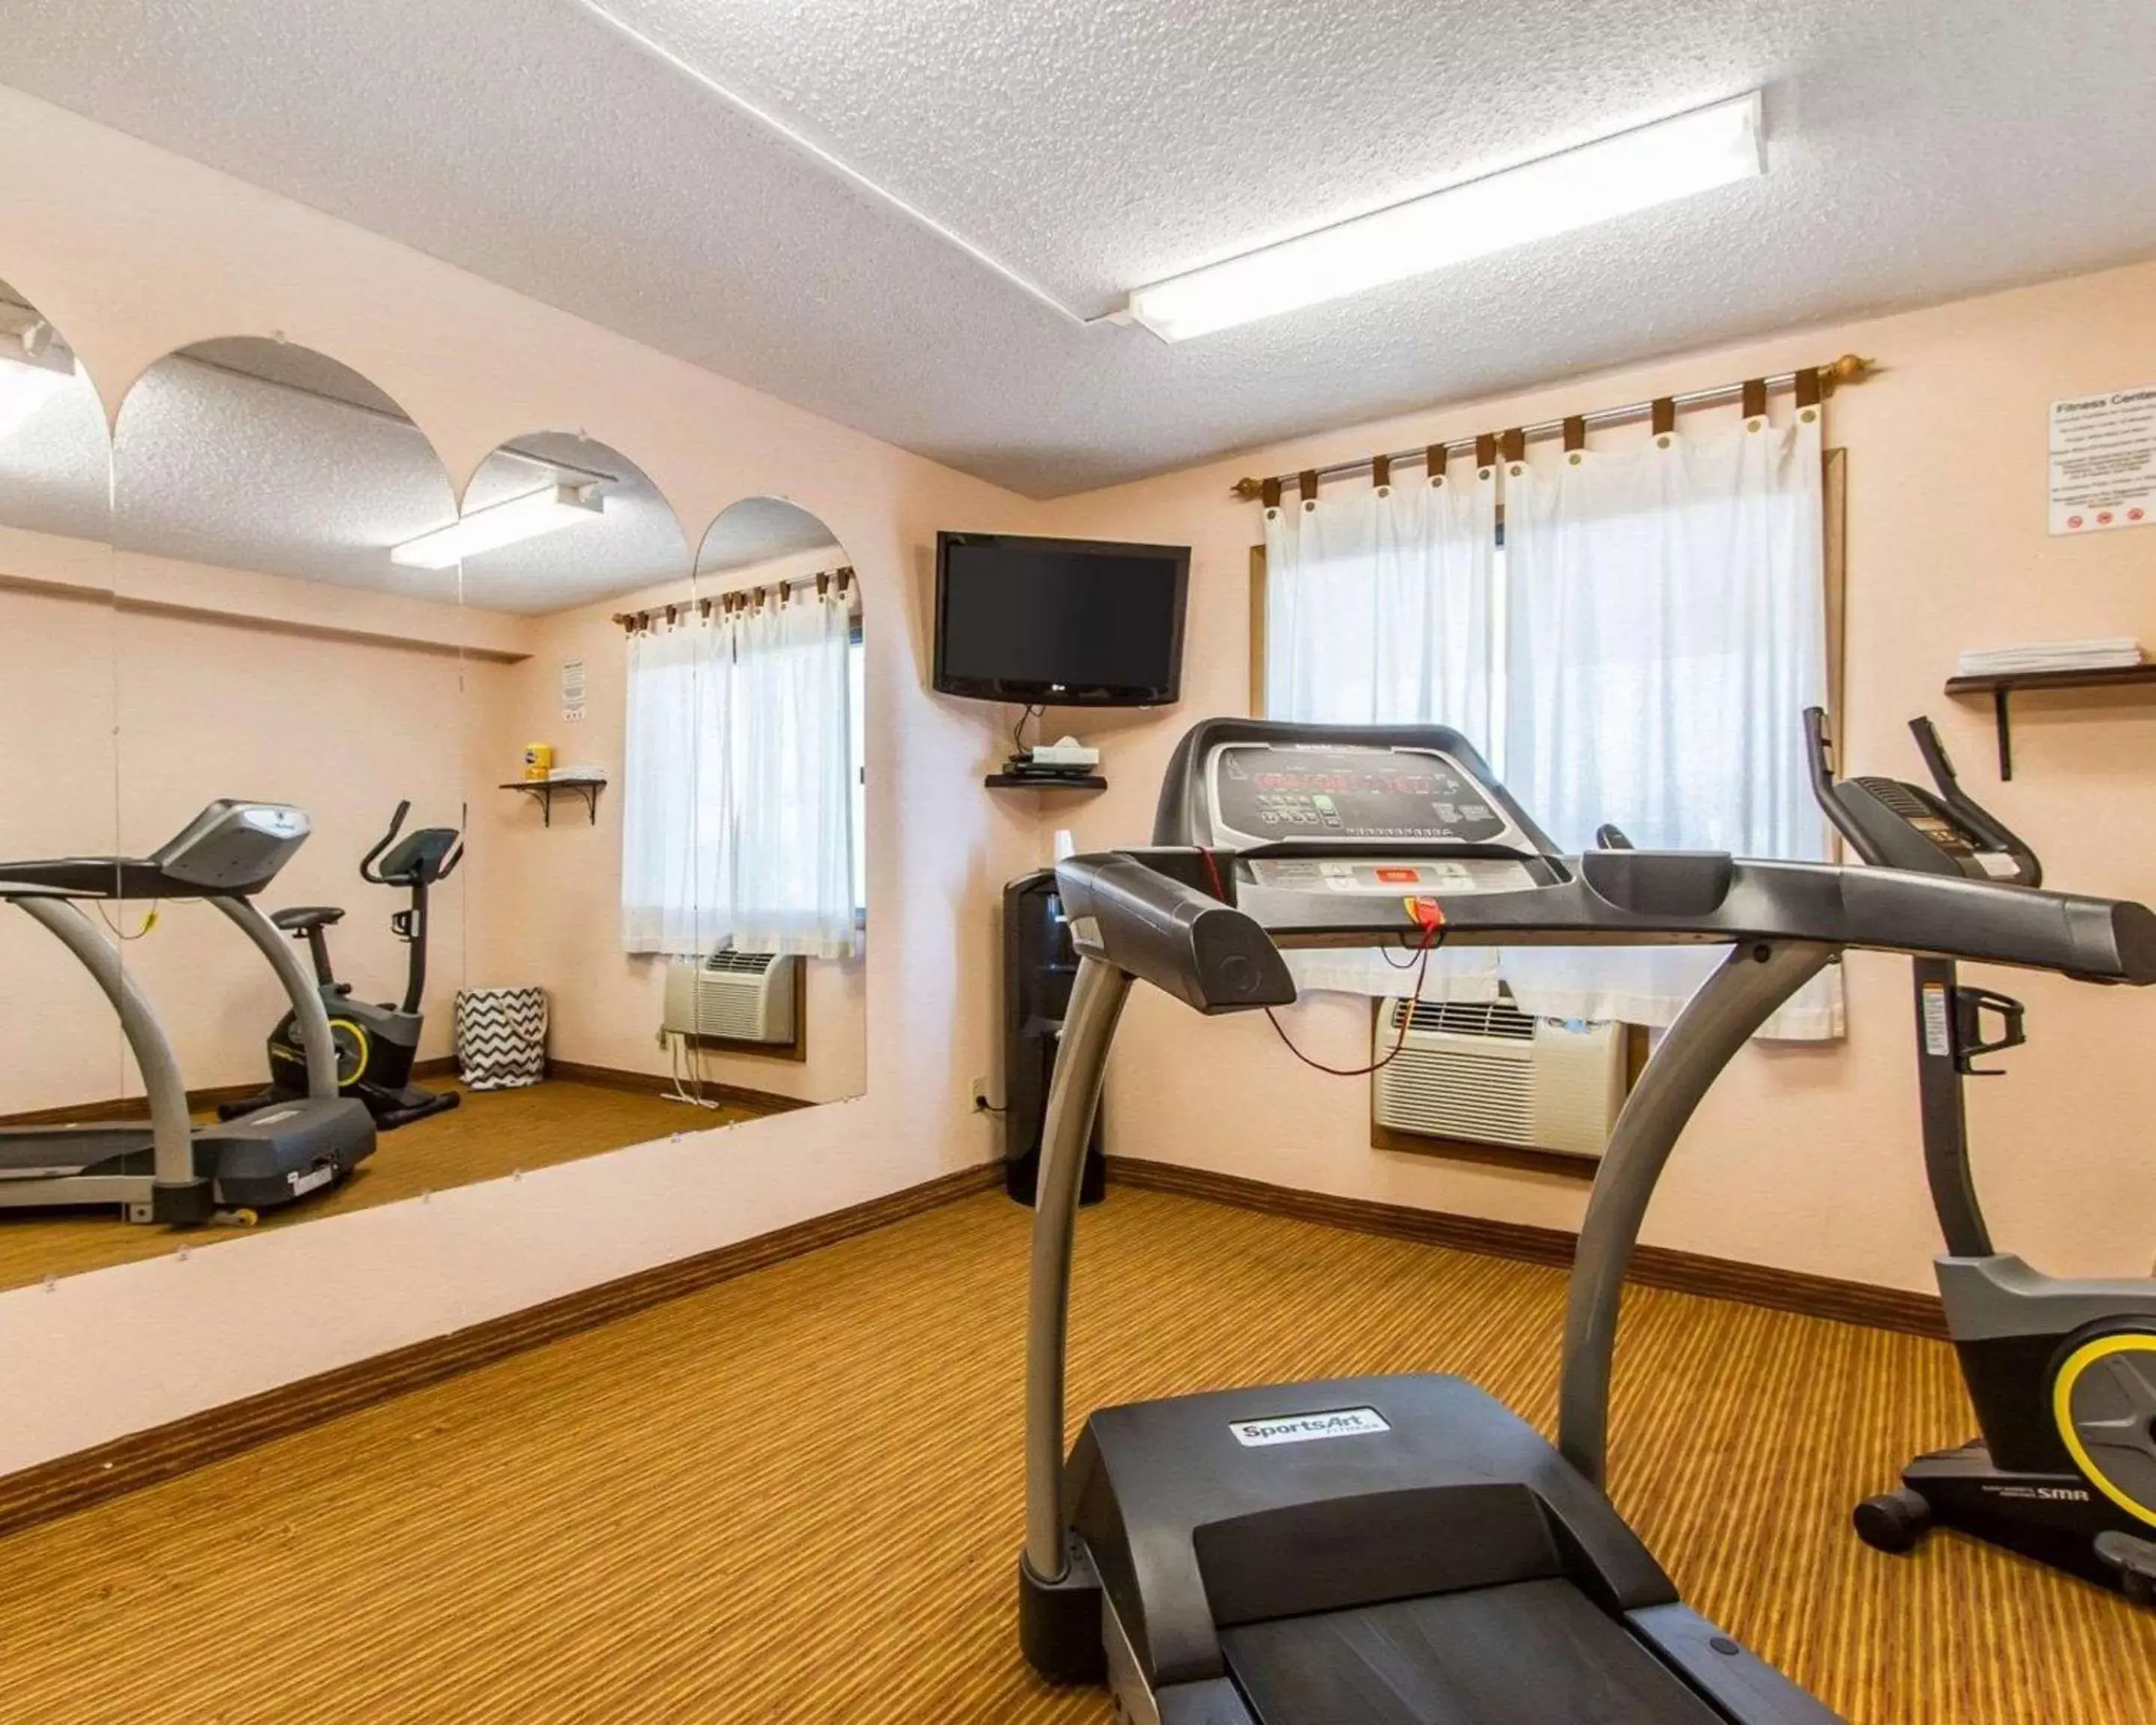 Fitness centre/facilities, Fitness Center/Facilities in Quality Inn & Suites Ottumwa